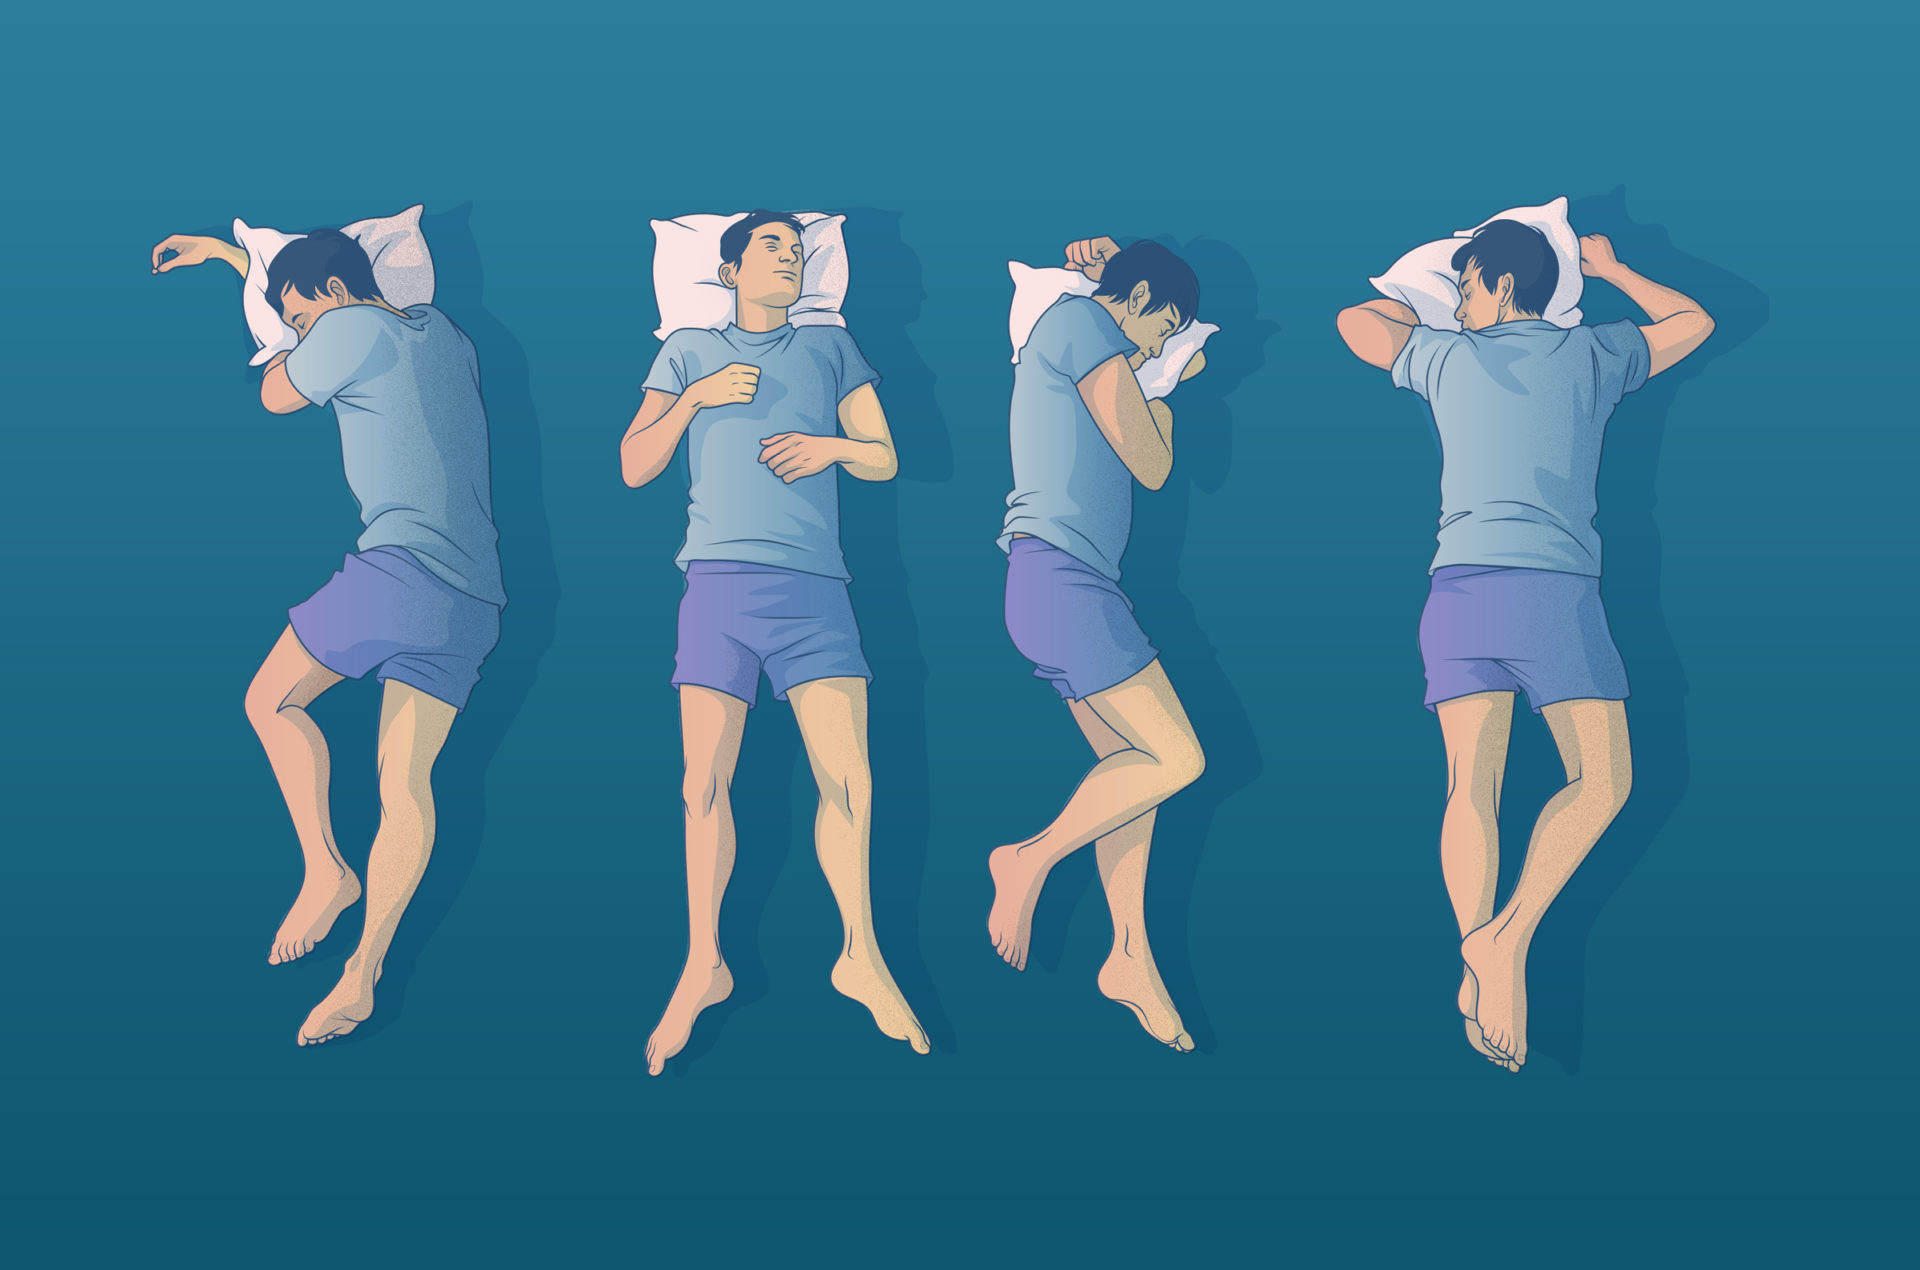 5 Best Sleeping Positions for Stomach Pain Relief